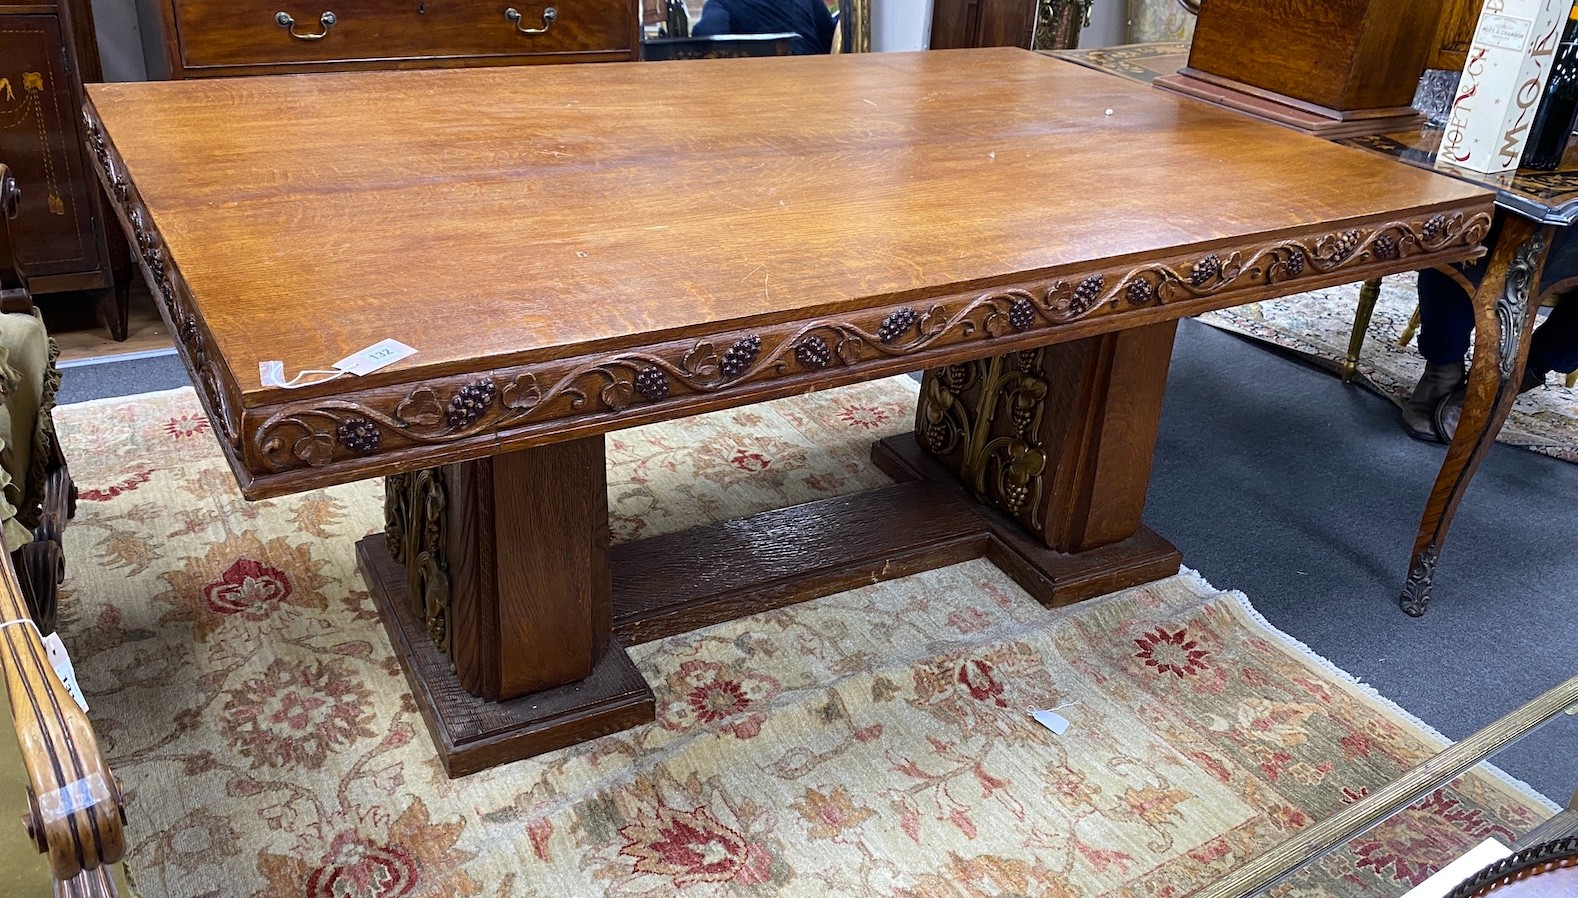 An early 20th century gilt bronze mounted rectangular oak dining table with cast fruiting vine decoration, width 180cm, depth 113cm, height 75cm